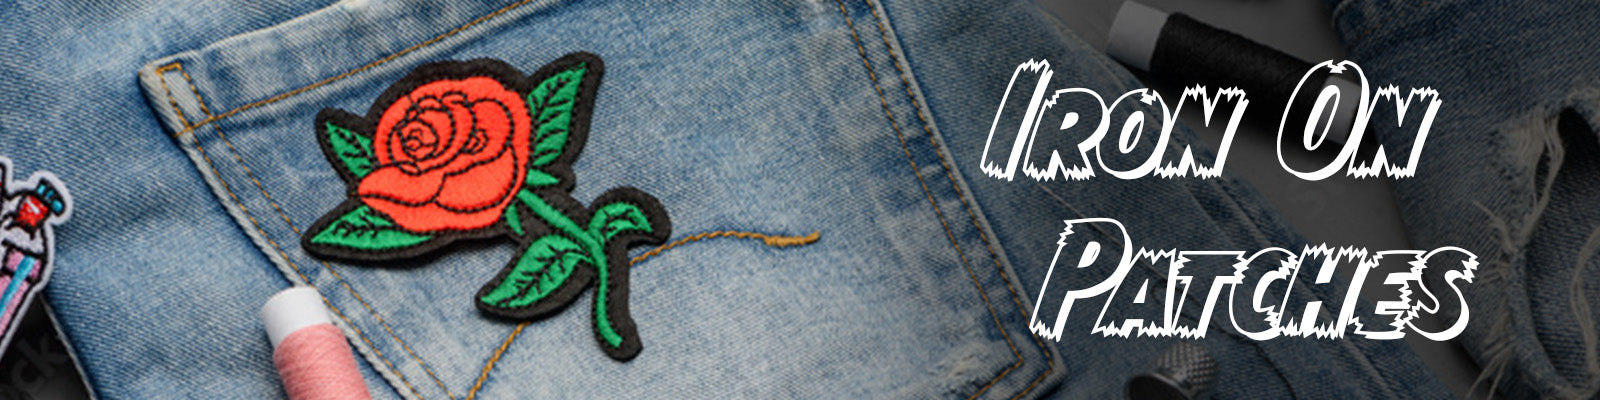 How To Iron On Patches On Jeans– TeckwrapCraft